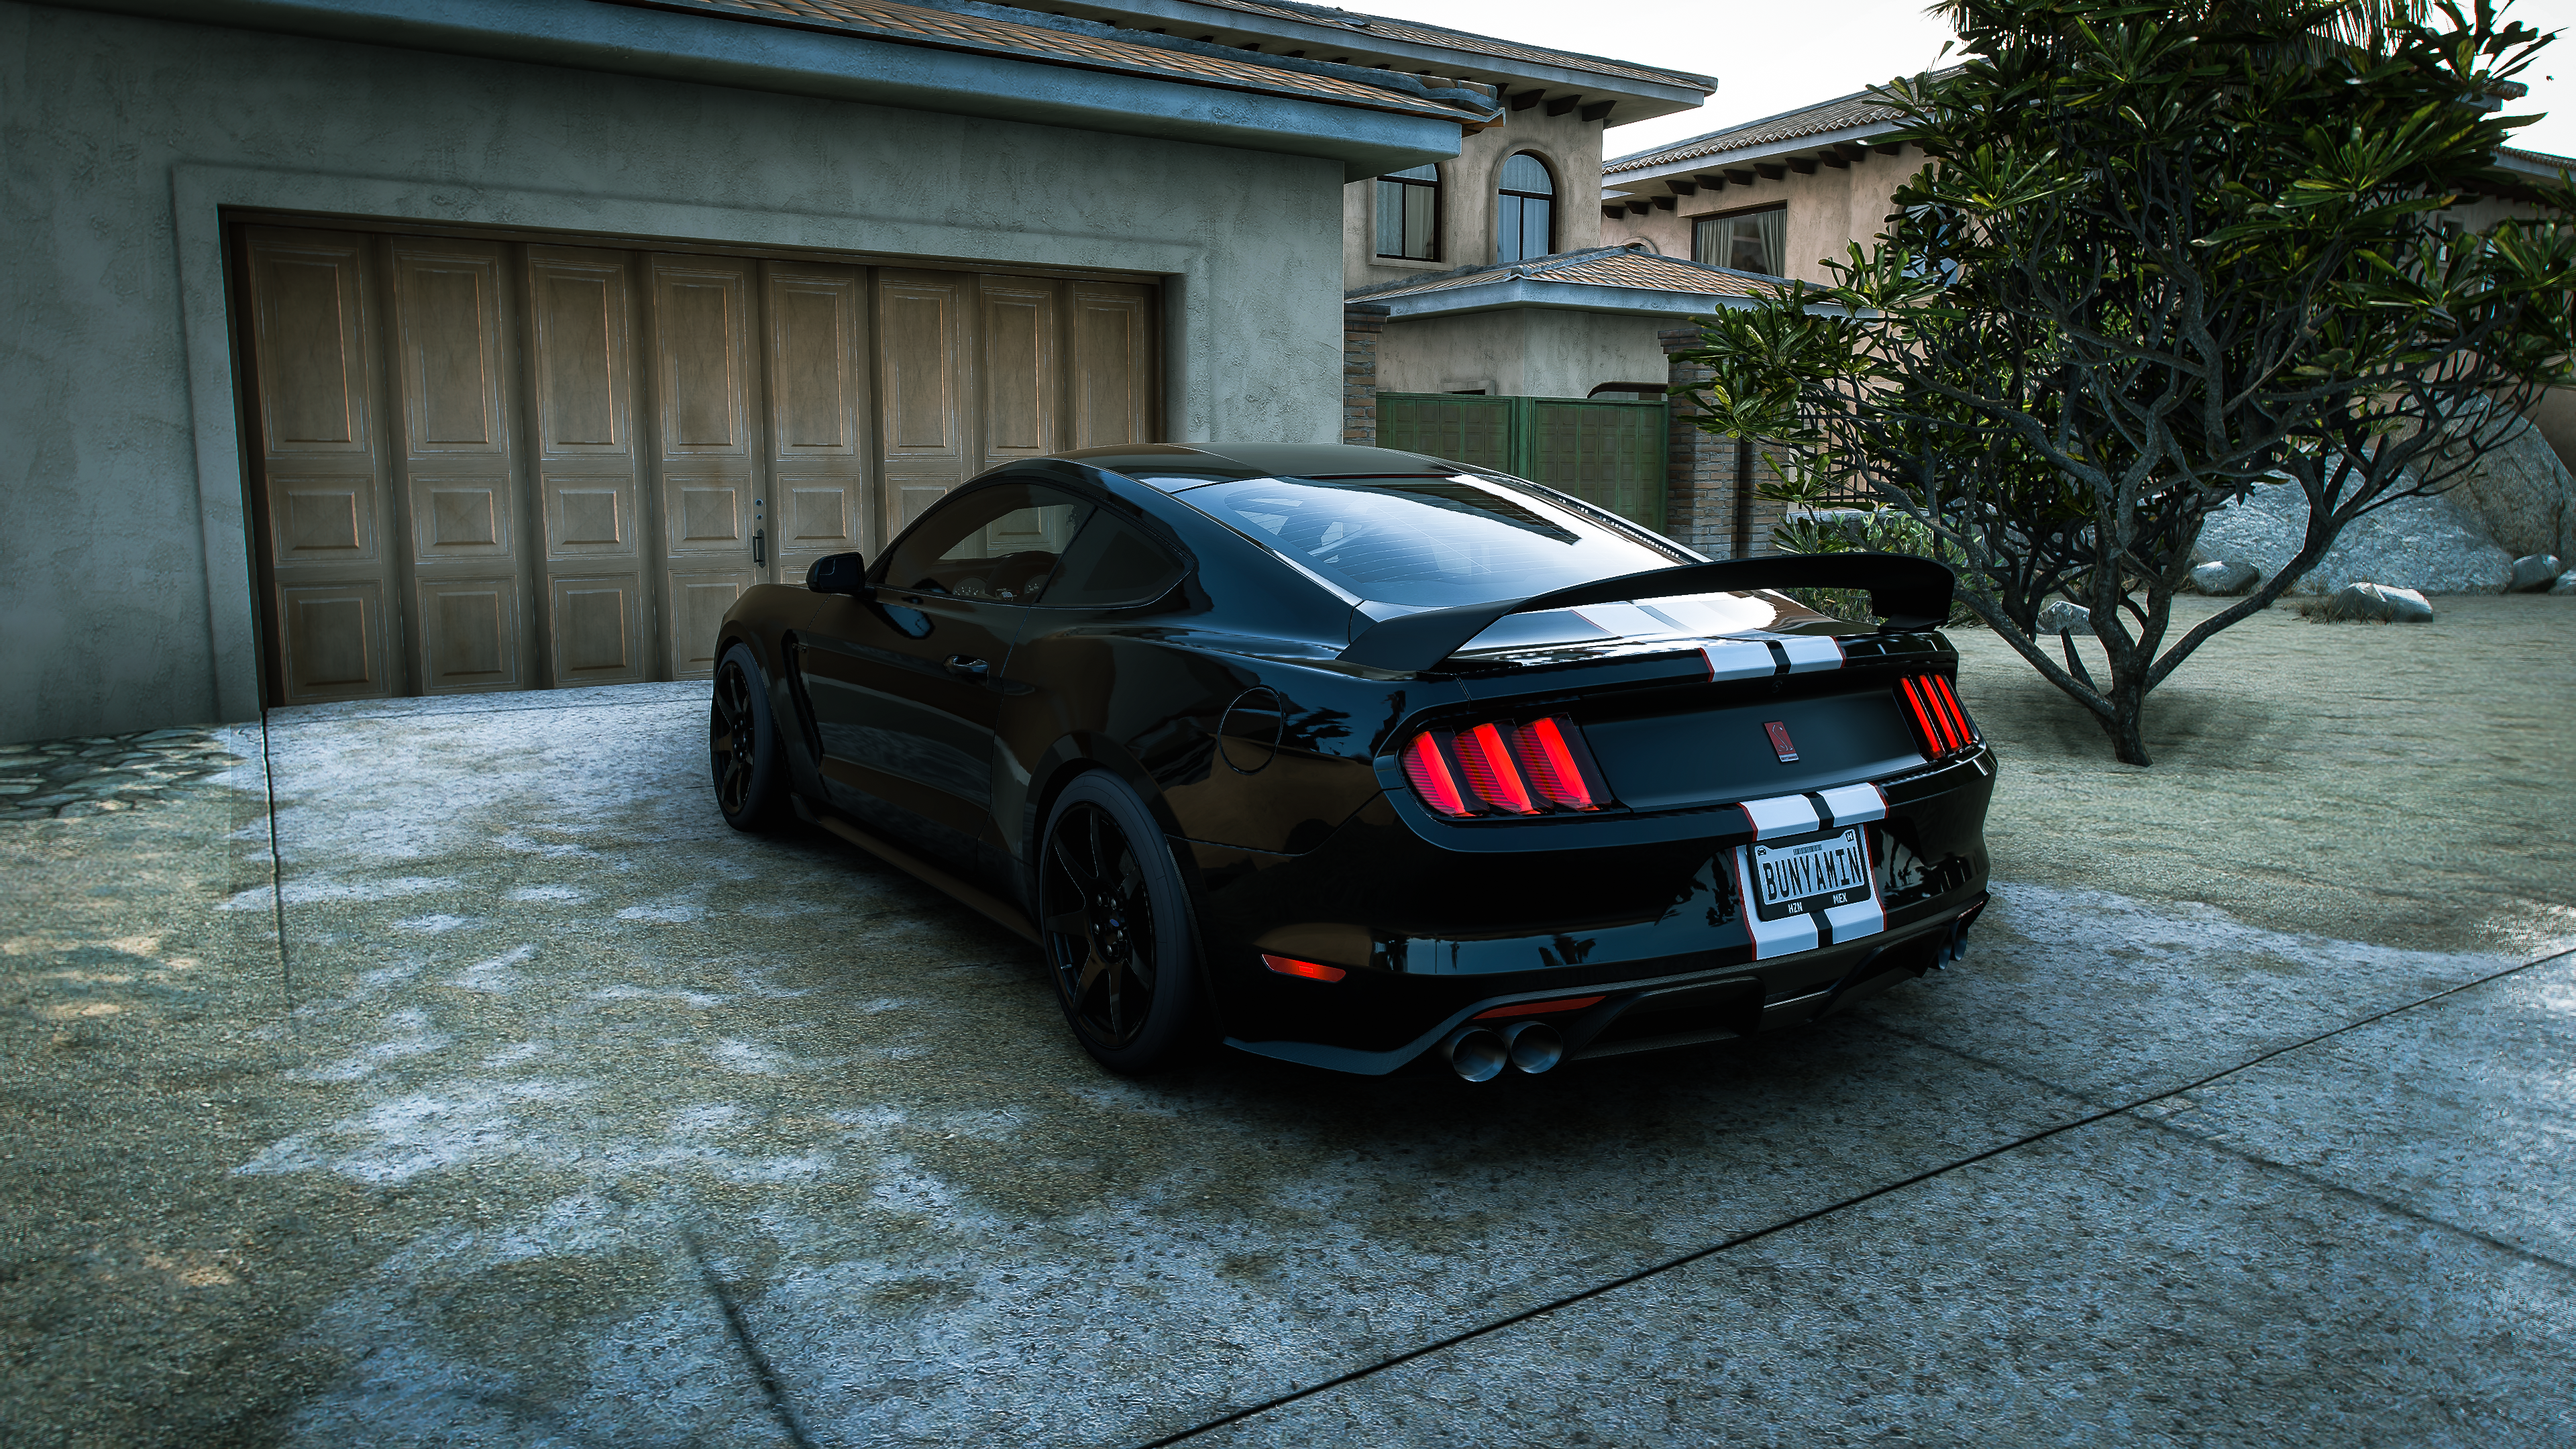 General 3840x2160 Forza Horizon 5 Forza Horizon Forza Ford Shelby race cars video games video game art garage Mexican vehicle licence plates CGI Ford Mustang